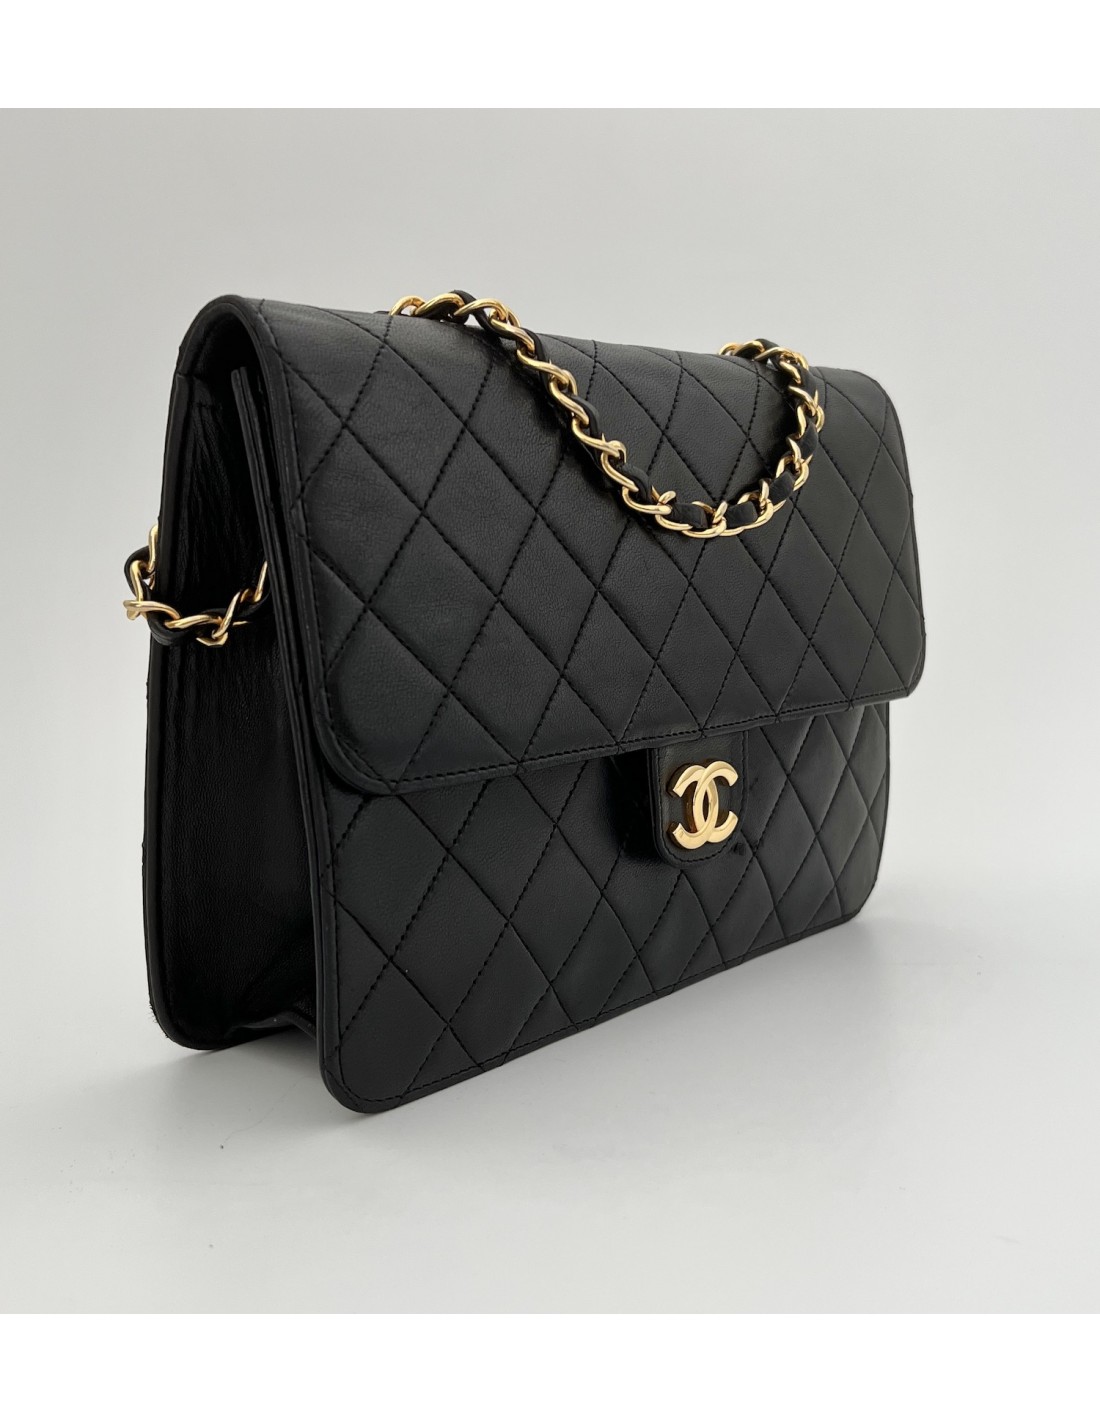 StockX: How to Score Pre-Owned Chanel Bags for Less